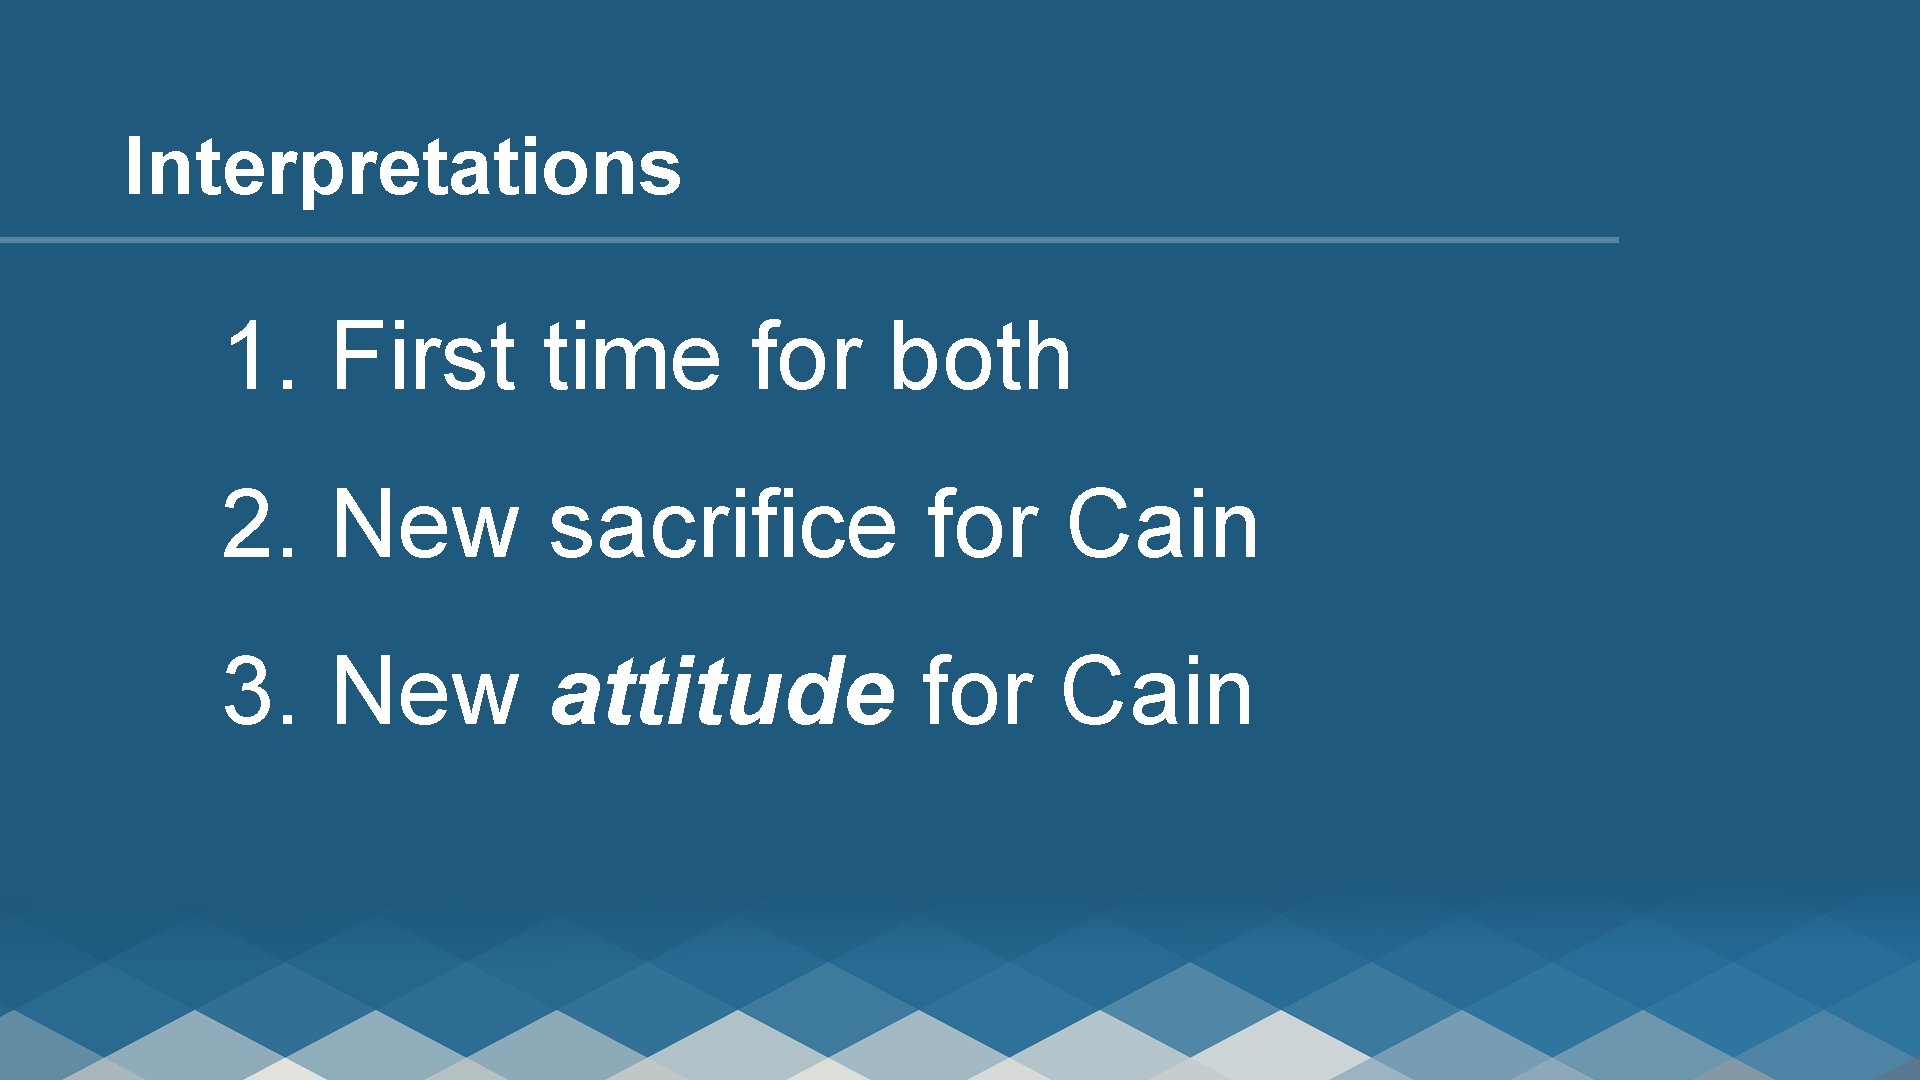 Interpretations 1. First time for both 2. New sacrifice for Cain 3. New attitude